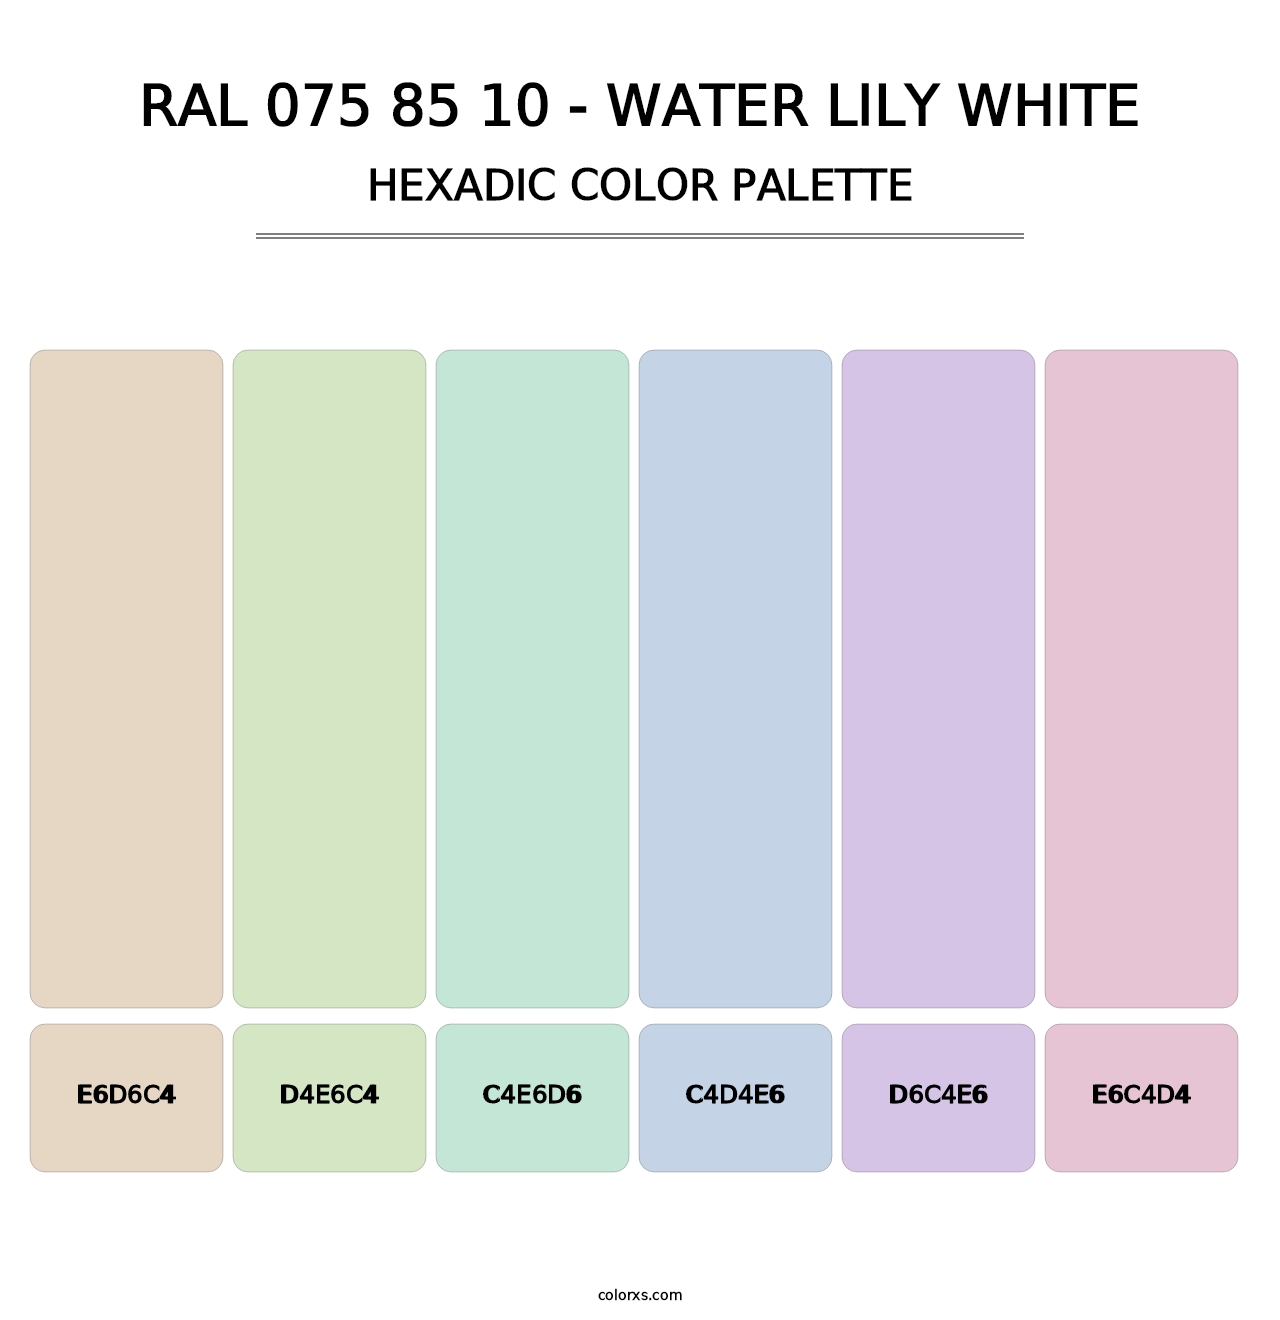 RAL 075 85 10 - Water Lily White - Hexadic Color Palette